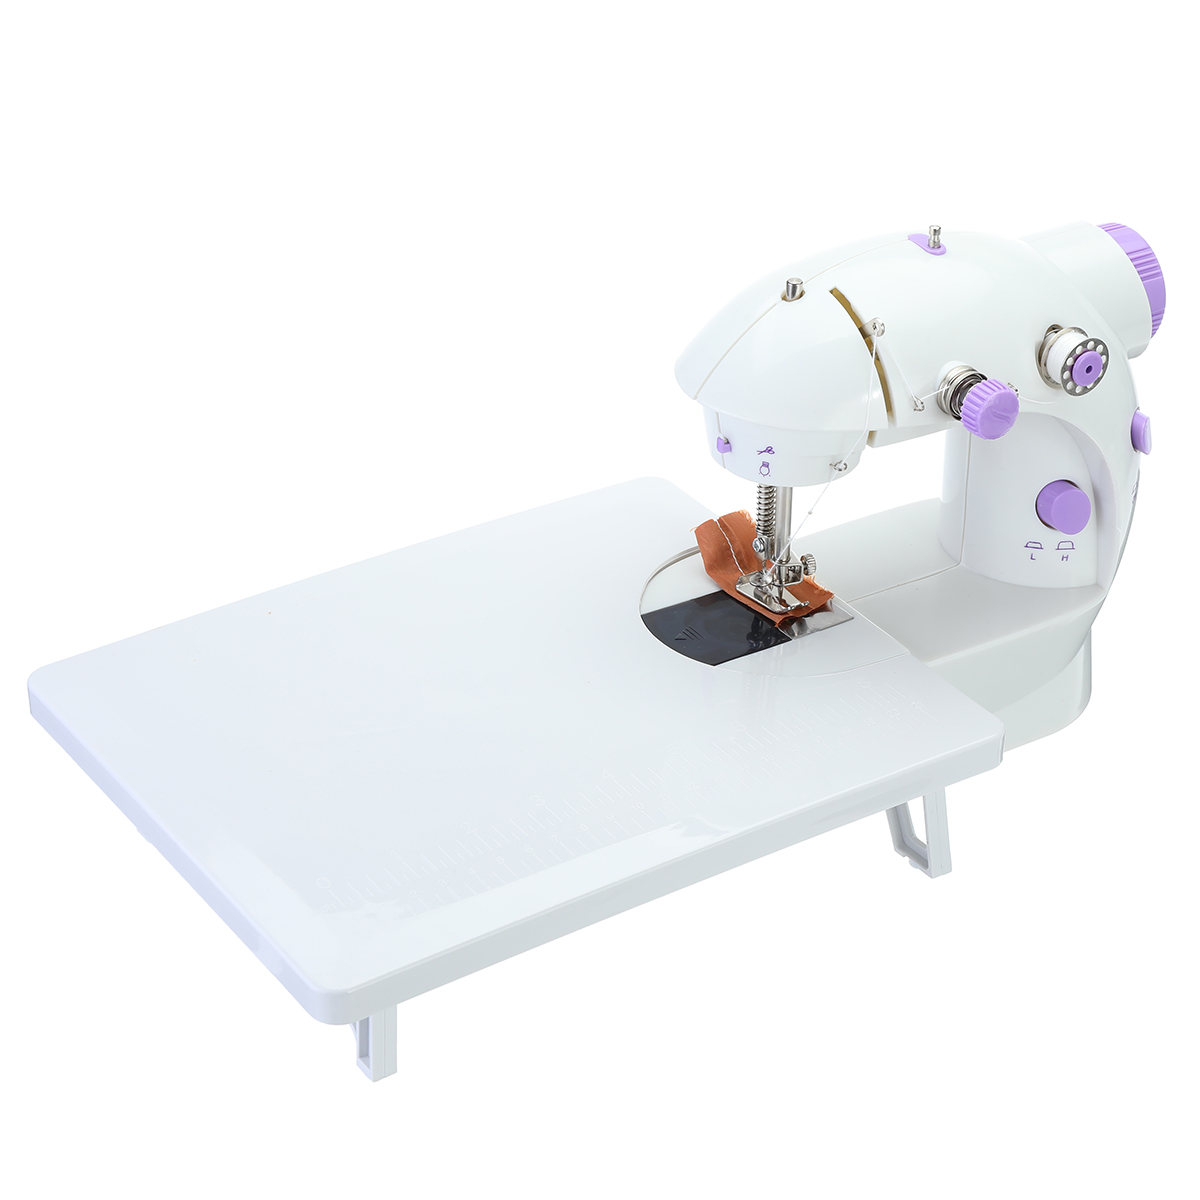 Find Portable Sewing Machine Mini With Lamp Thread Cutter Extension Table Electric Sewing Machines DIY Embroidery Machine for Sale on Gipsybee.com with cryptocurrencies